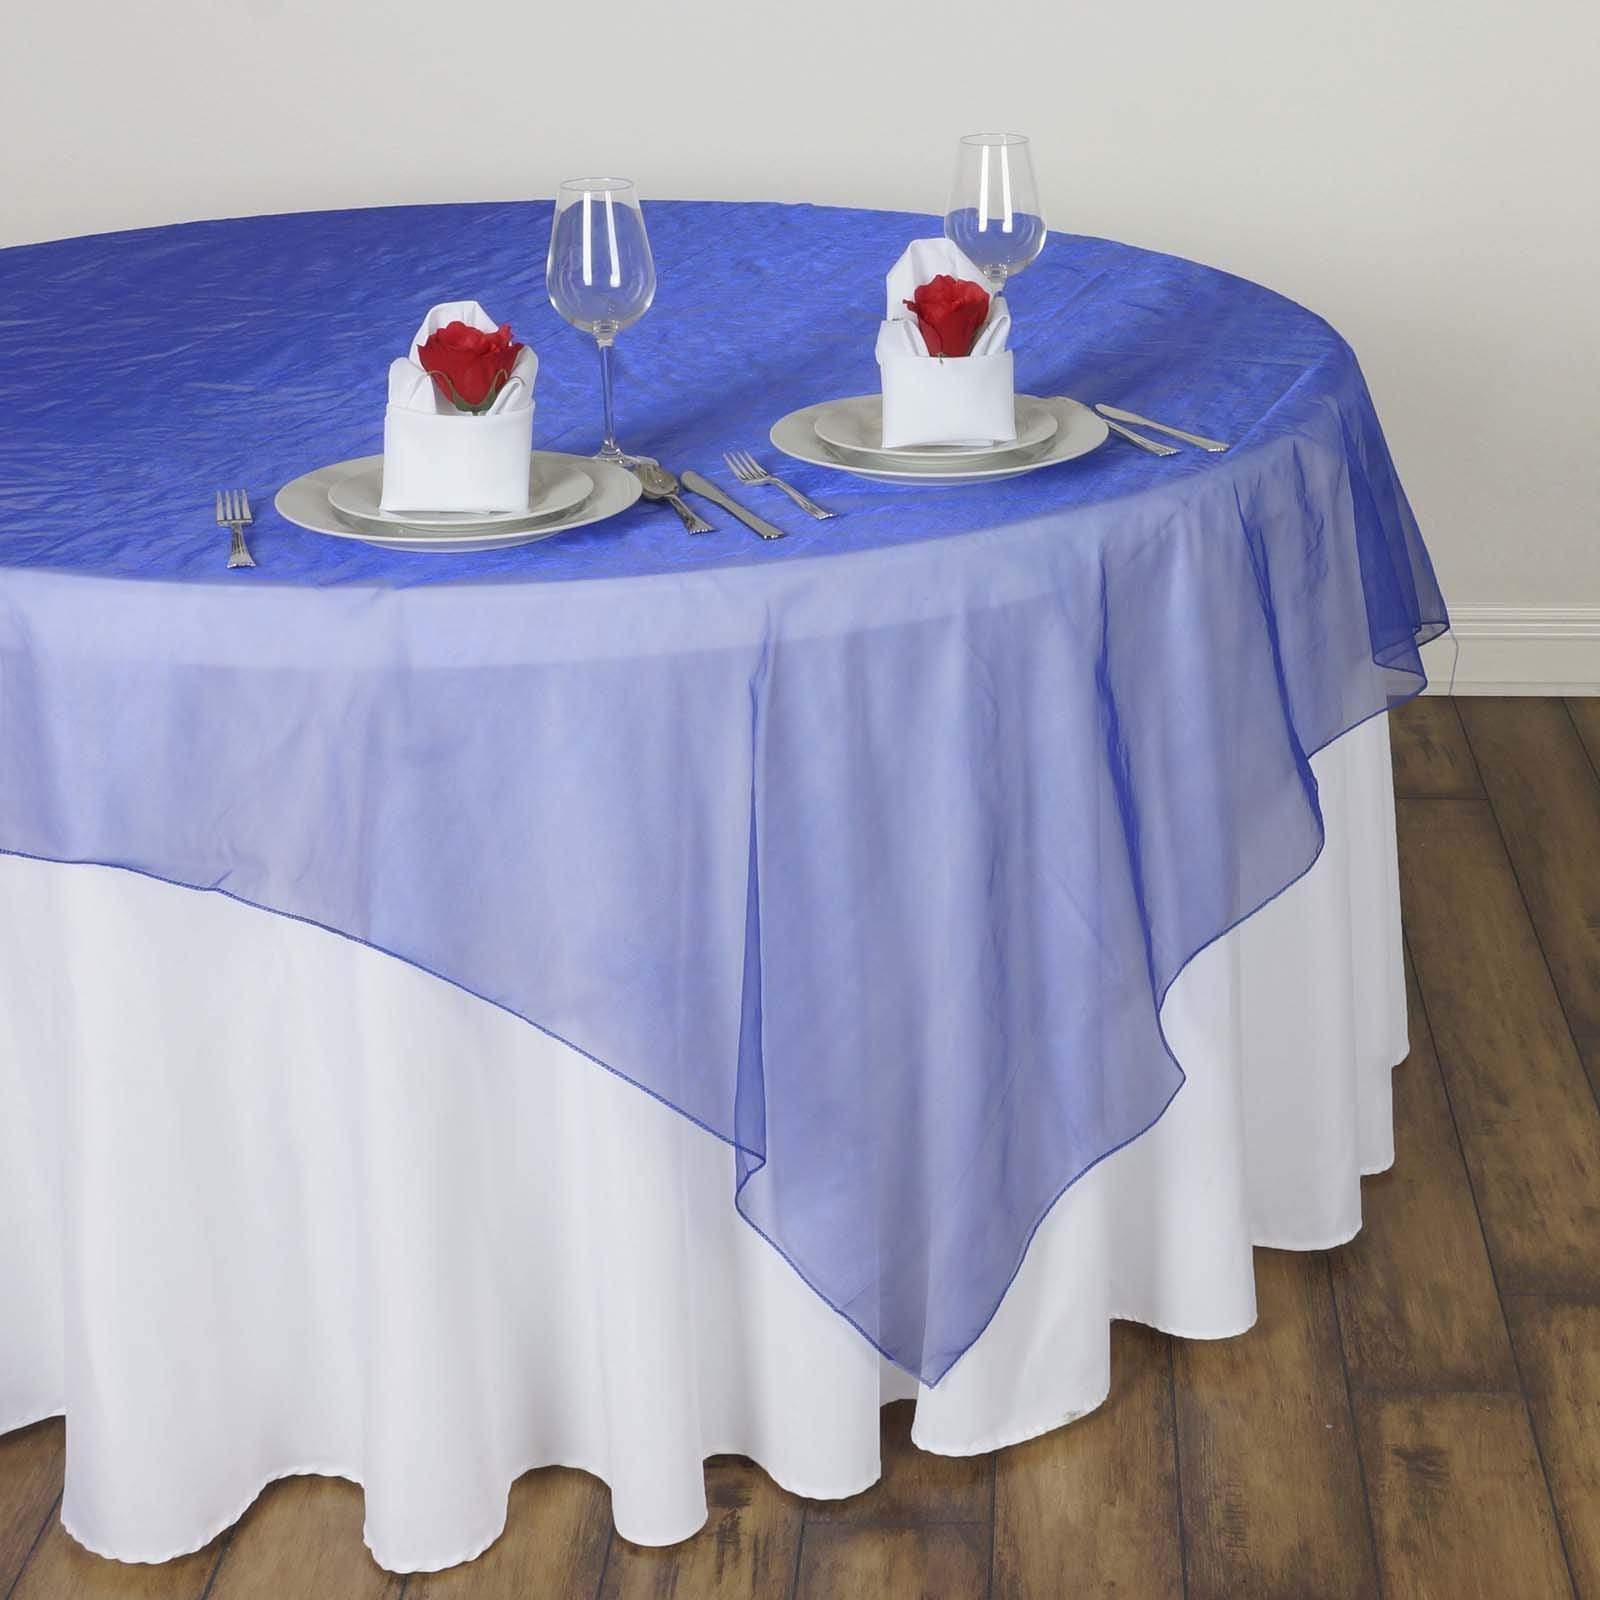 60 inch Royal Blue Square Organza Table Overlay